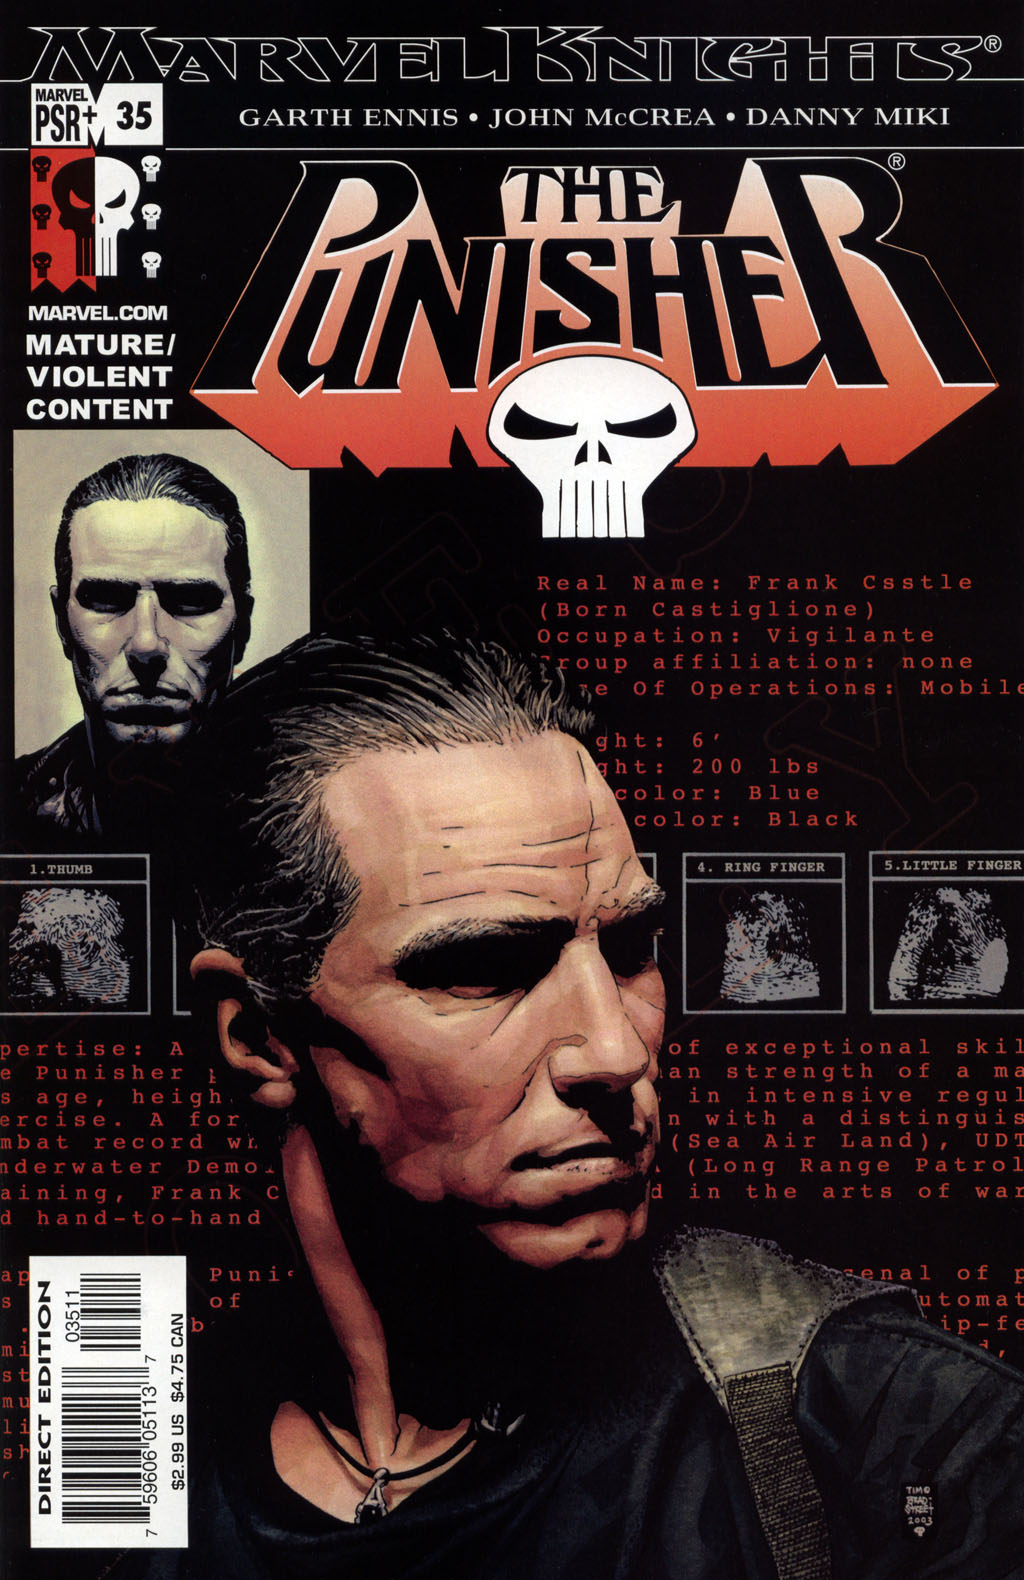 The Punisher (2001) issue 35 - Confederacy of Dunces #03 - Page 1